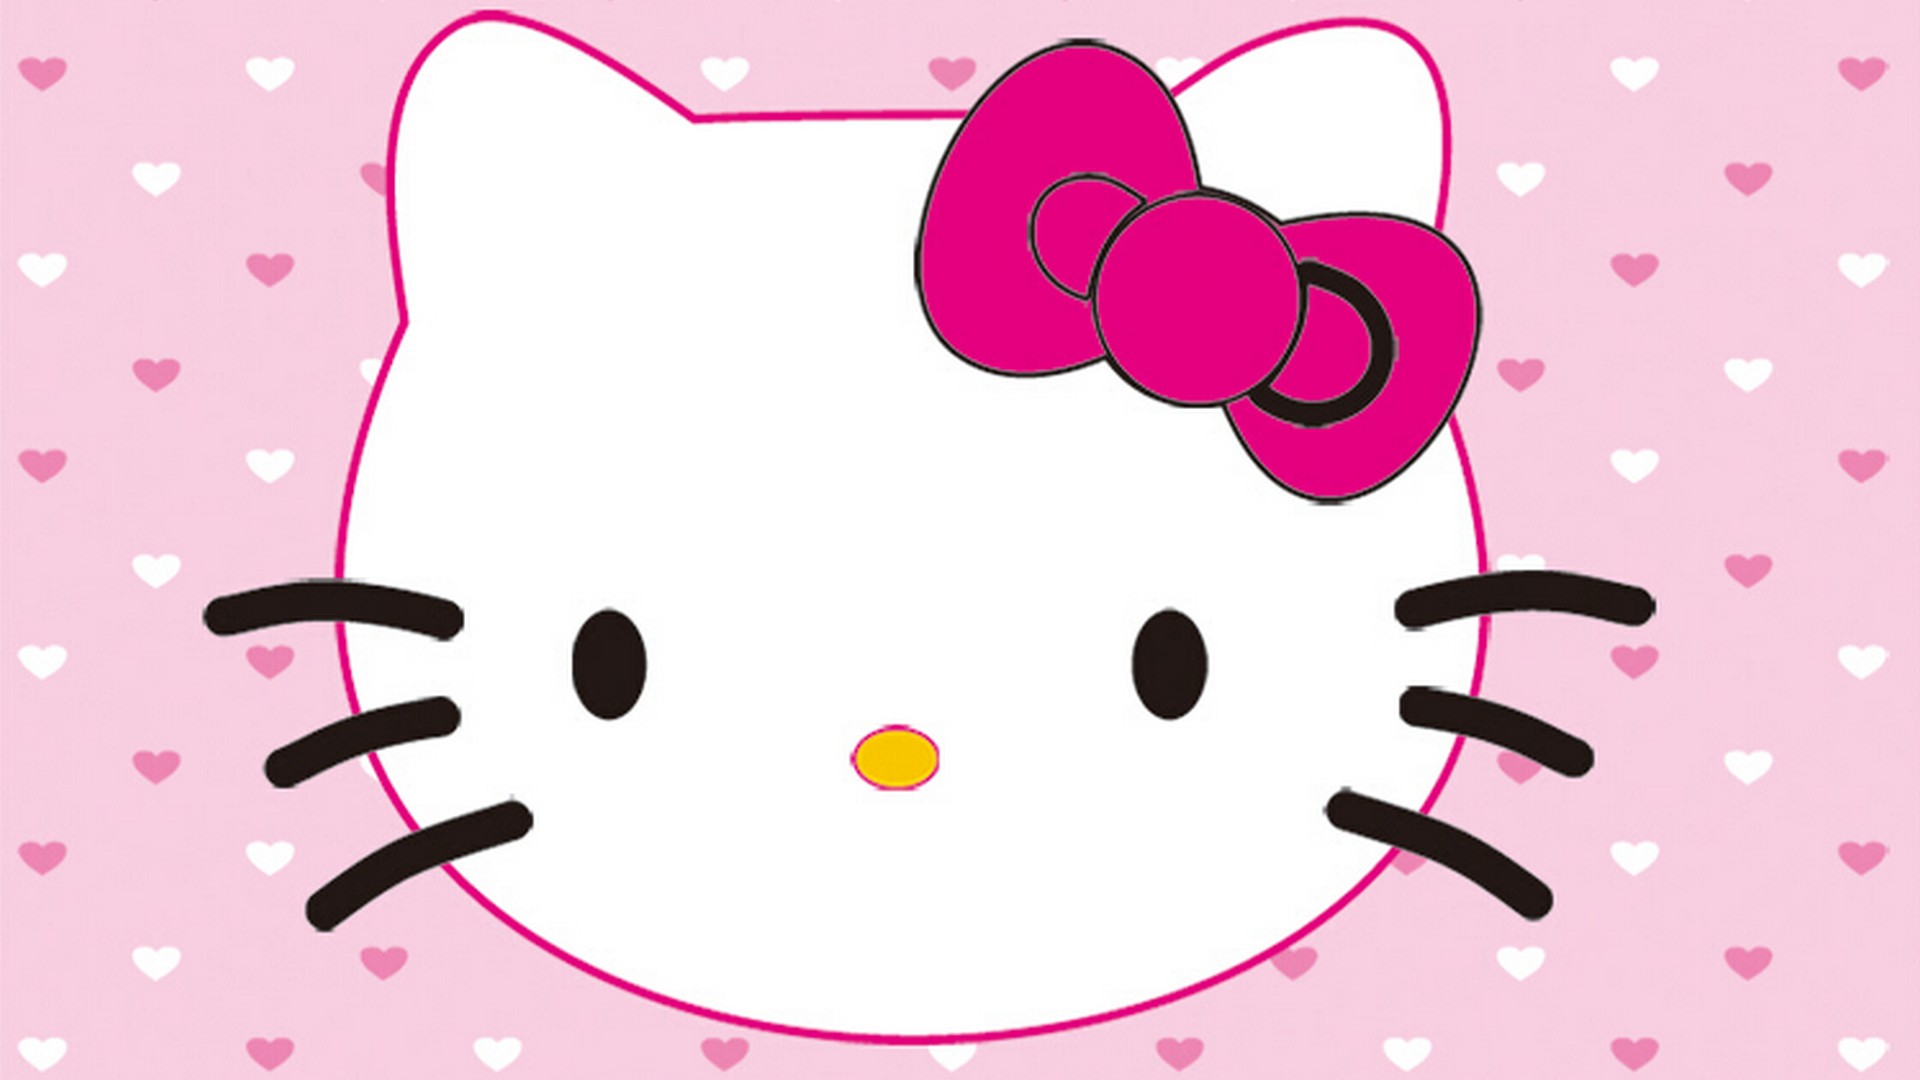 Hello Kitty Desktop Backgrounds With Resolution 1920X1080 pixel. You can make this wallpaper for your Desktop Computer Backgrounds, Mac Wallpapers, Android Lock screen or iPhone Screensavers